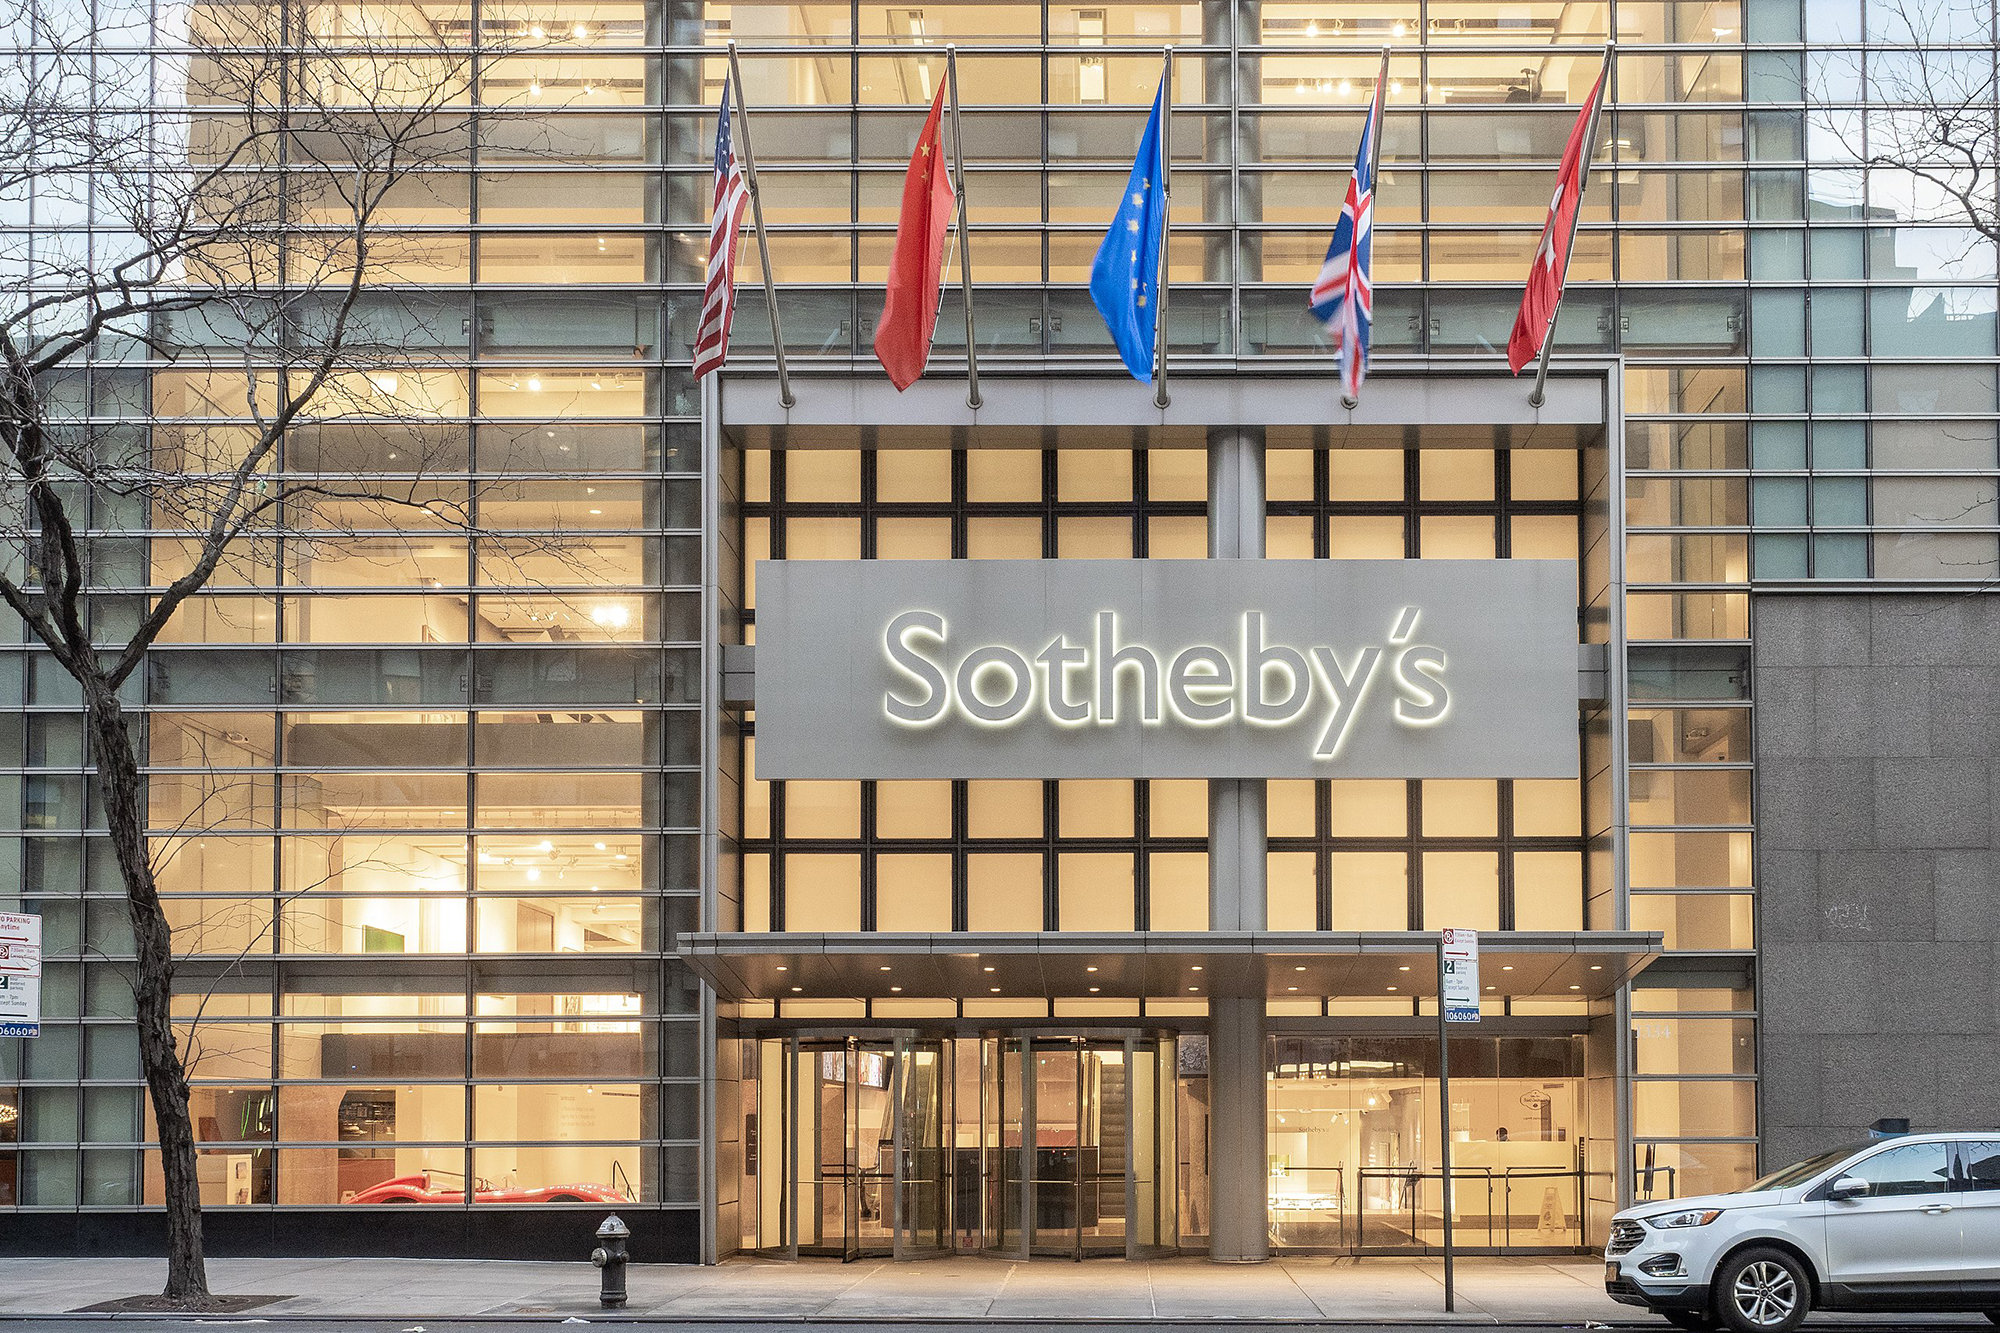 Sotheby's New York Auction house